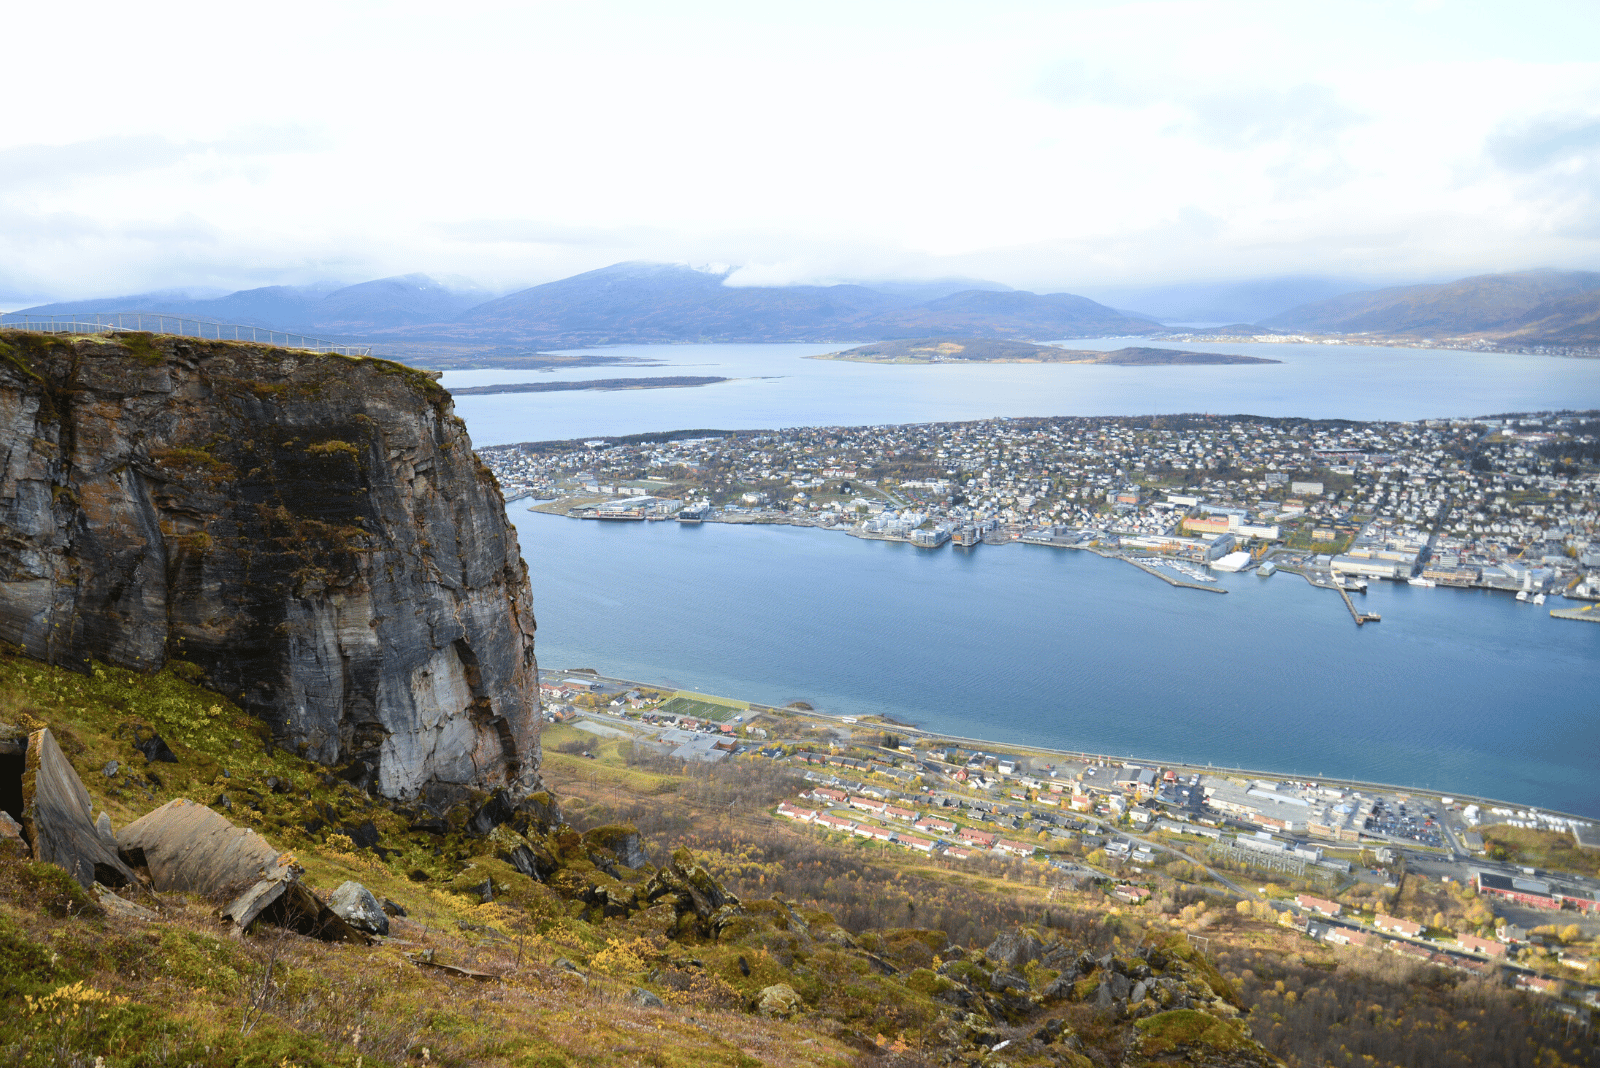 Viewpoint from Storsteinen Mountain in Norway